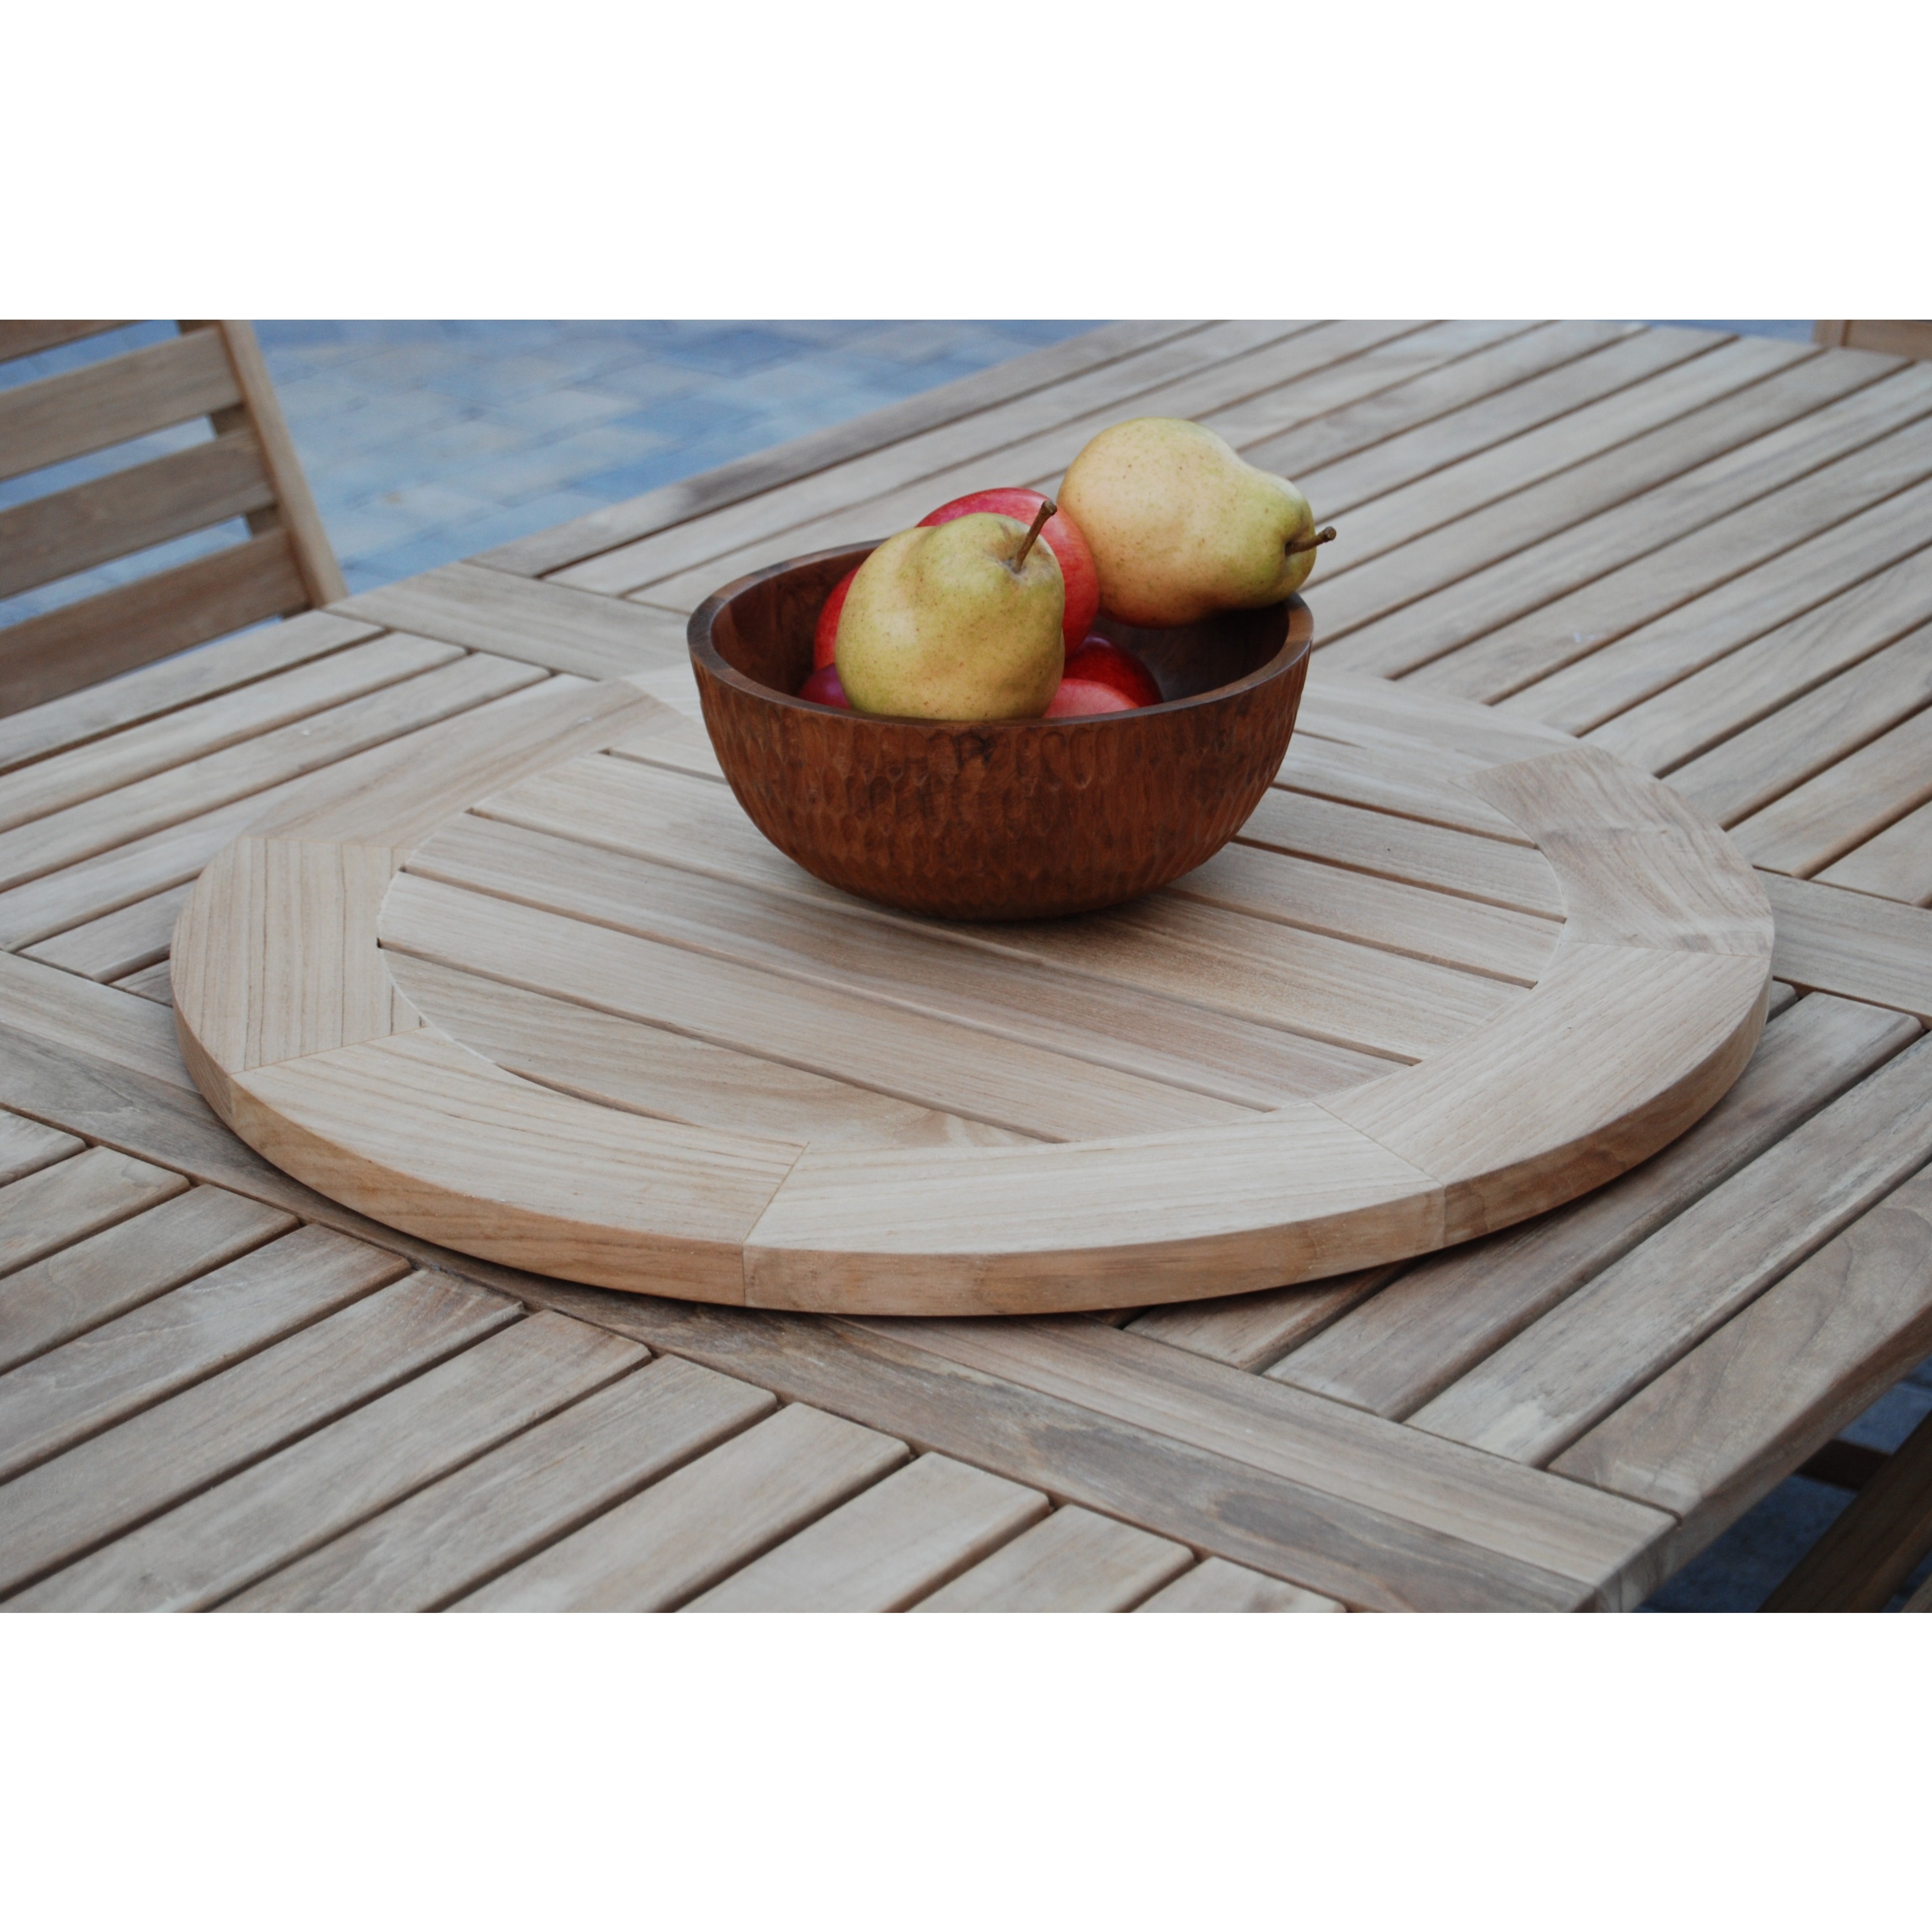 Teak Dining Table With Lazy Susan: Convenience At Your Fingertips